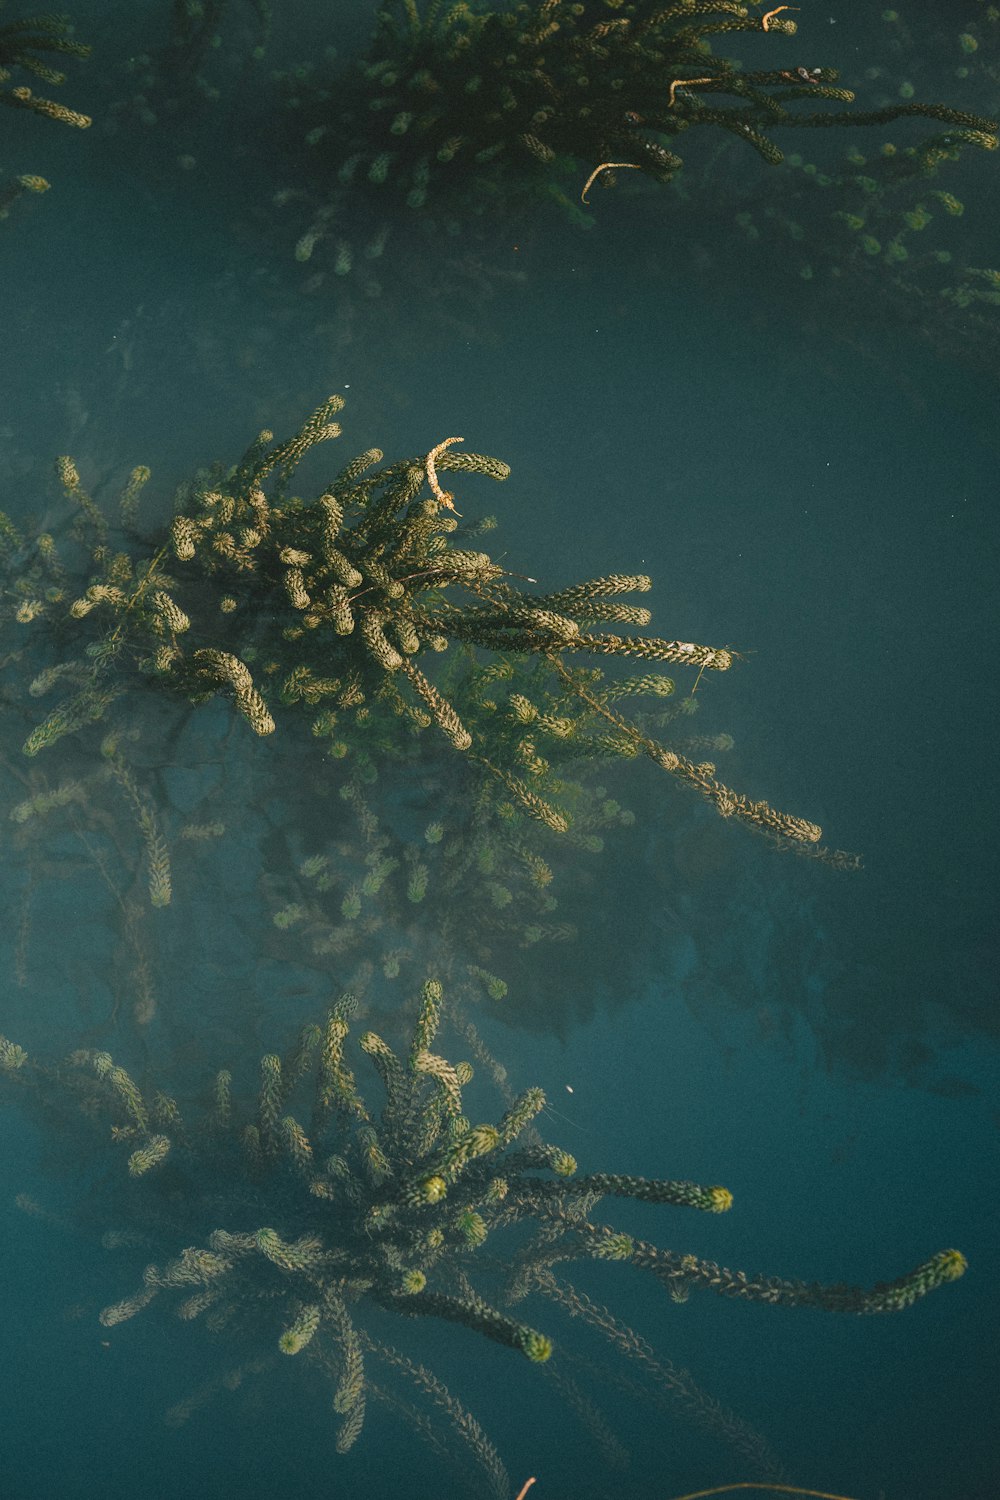 a bunch of plants floating in a body of water